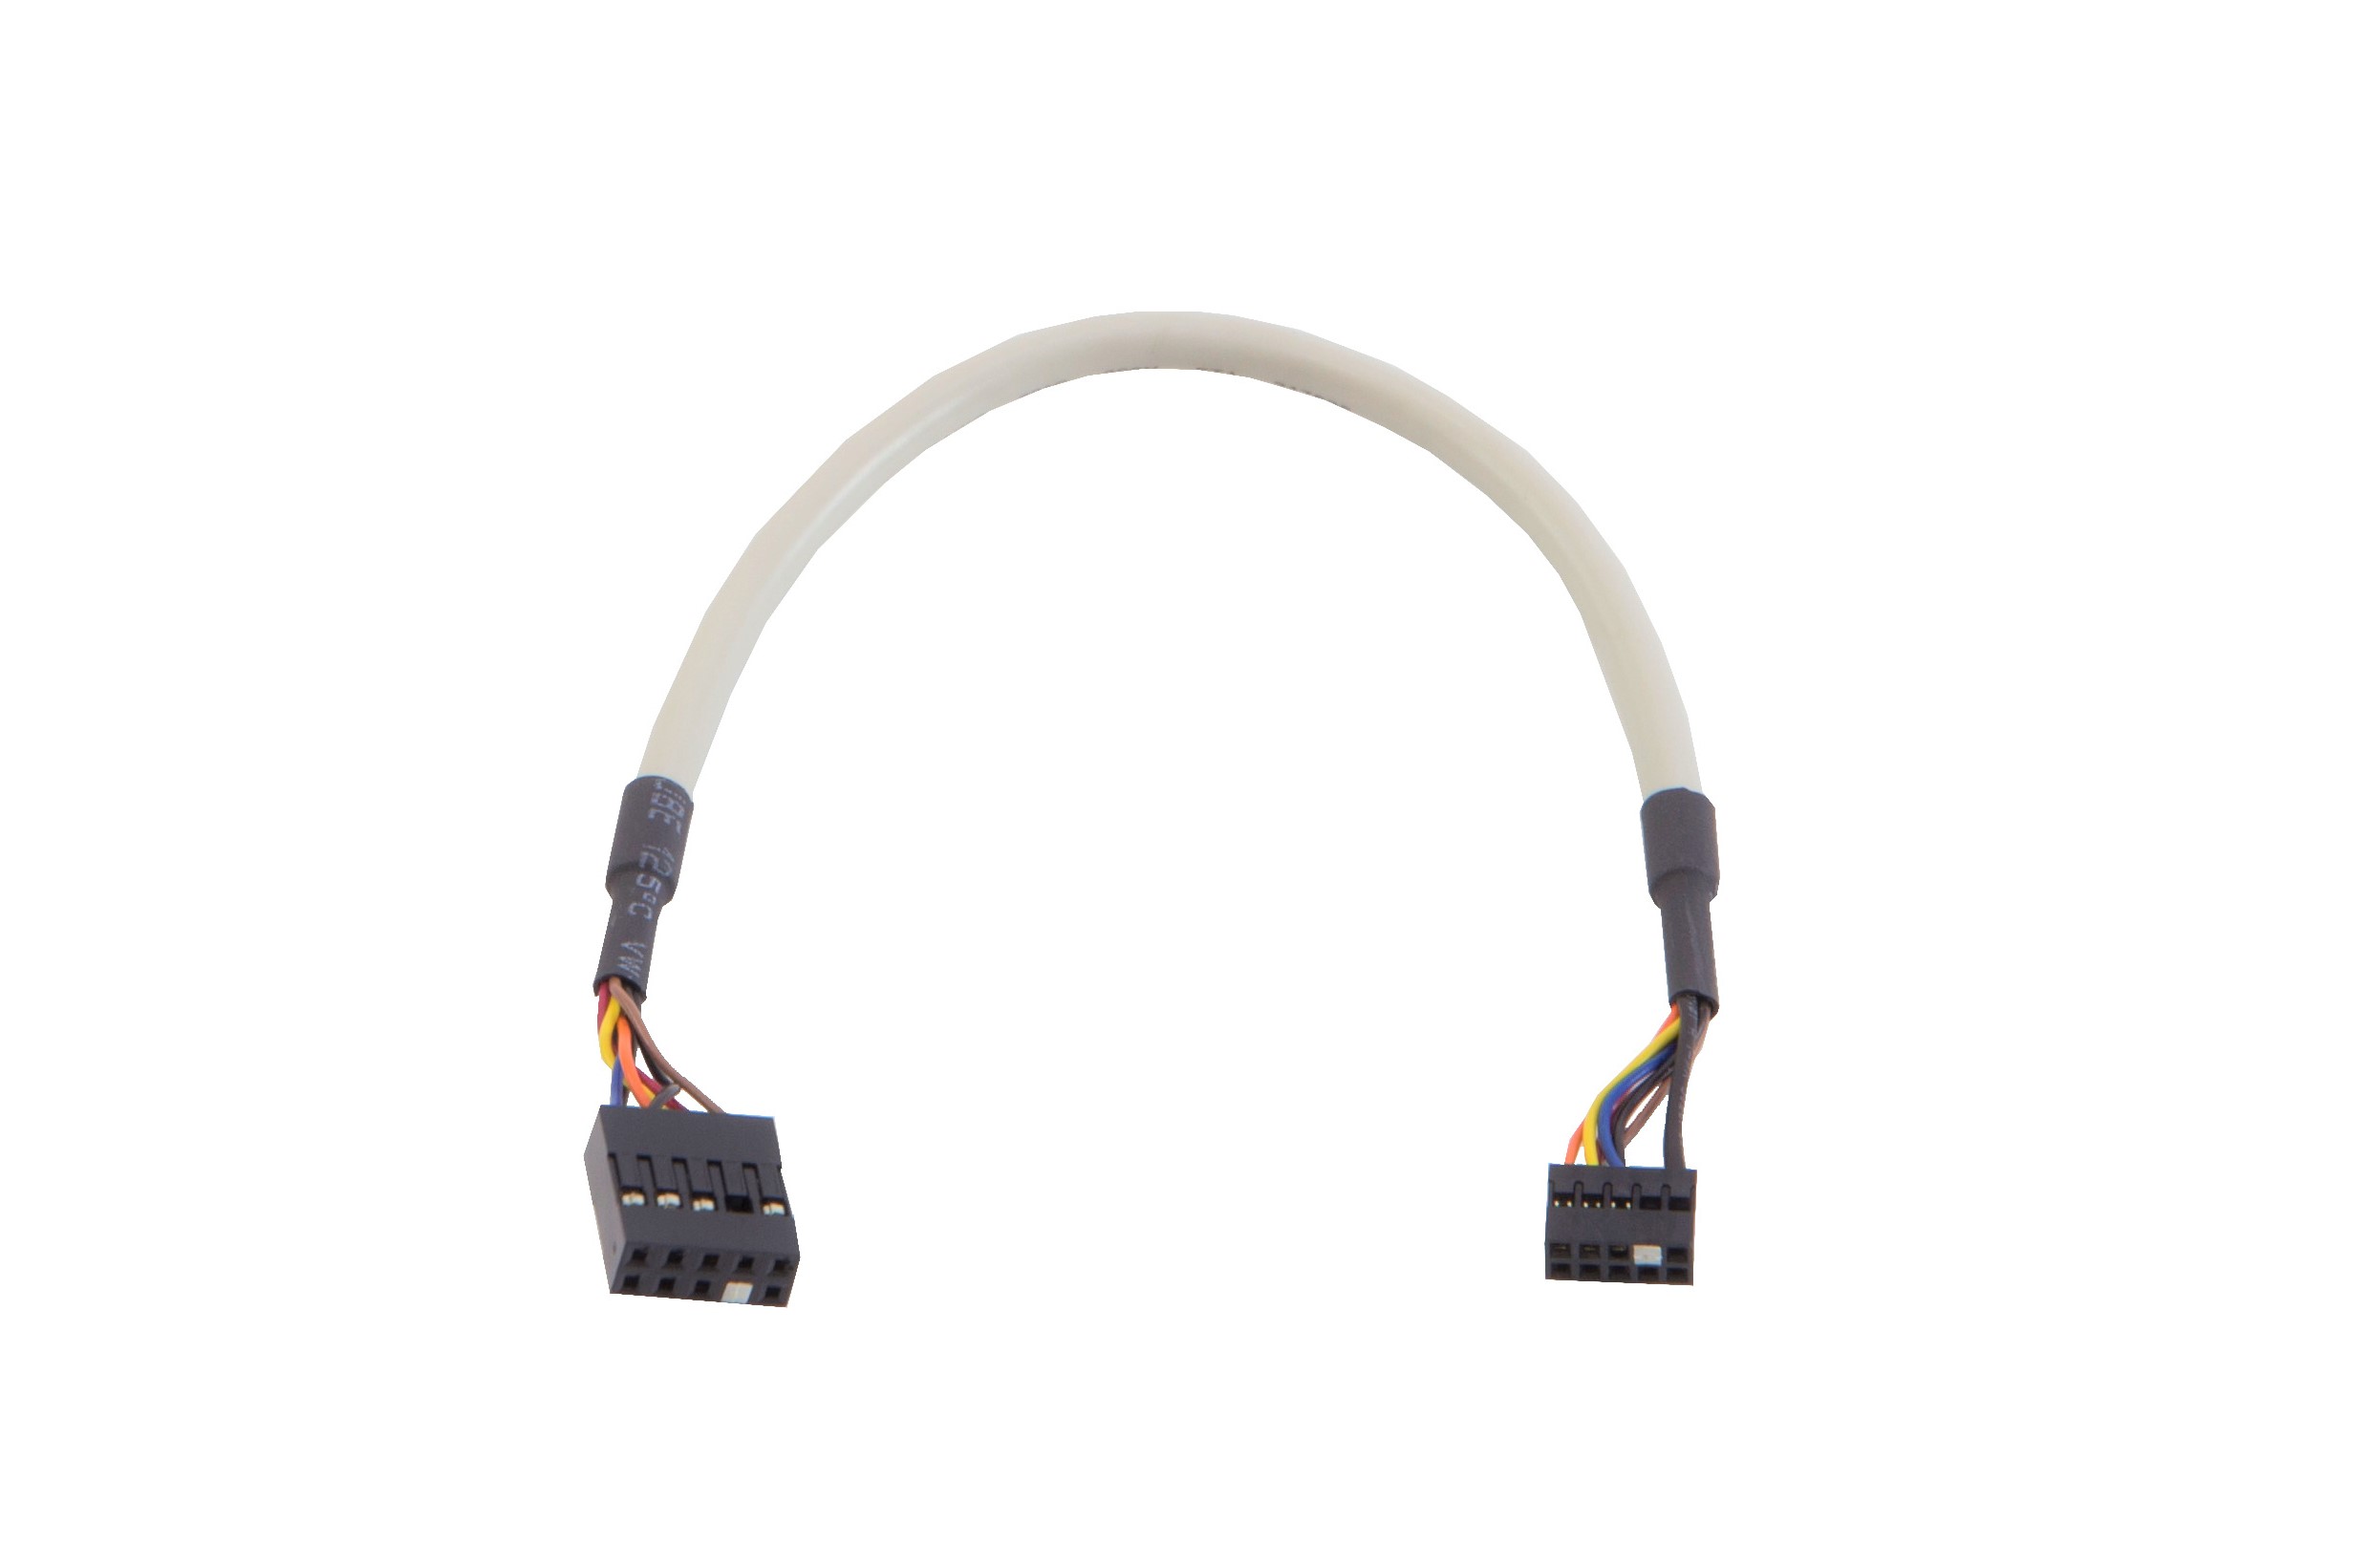 AUDIO CABLE(PITCH 2.54 TO 2.0)  |Products|Accessories|Cable & Cord